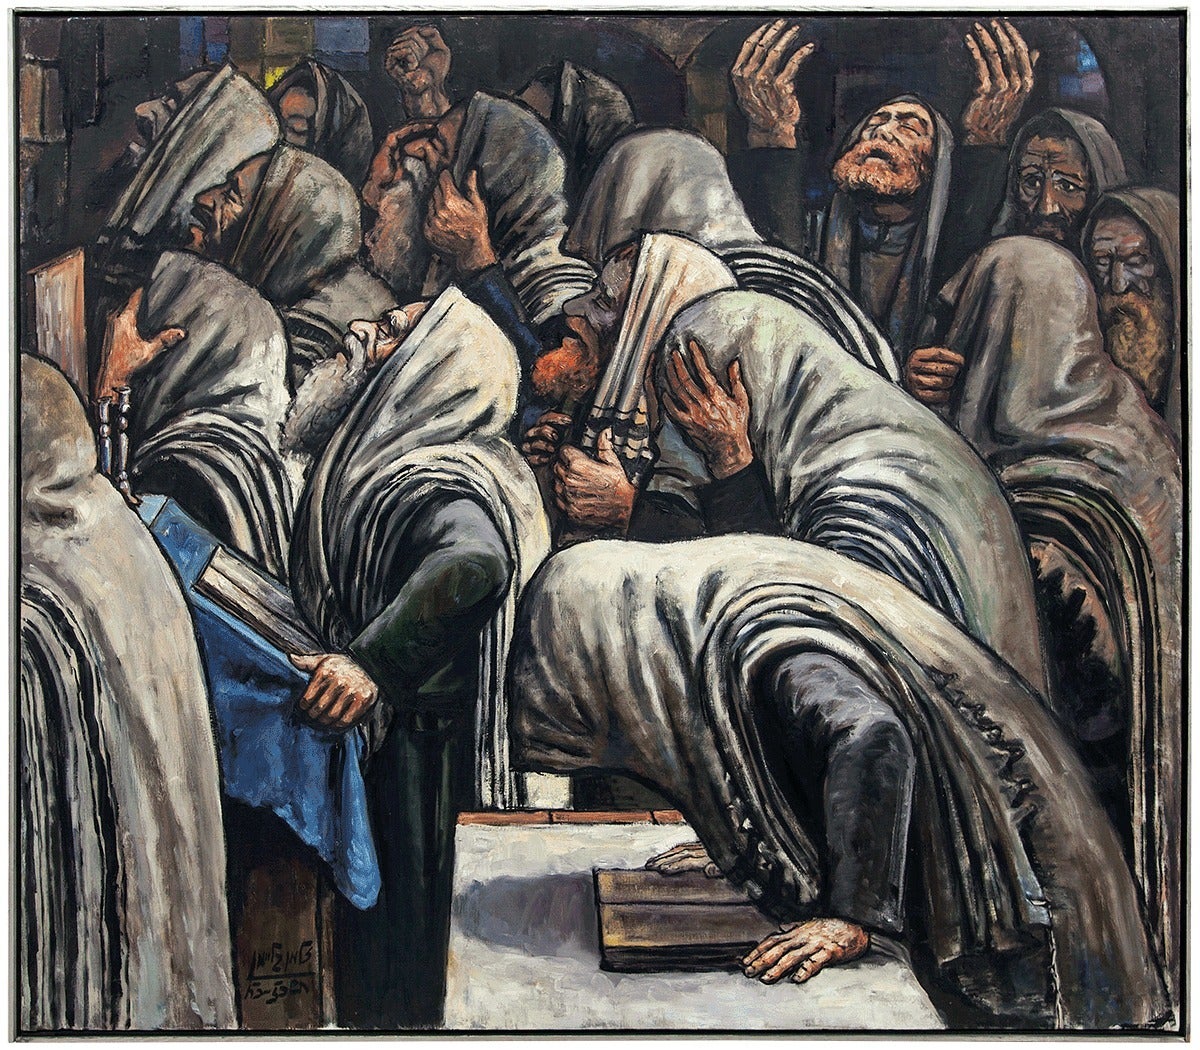 In this artwork the artist renders a group of Jewish men in prayer position at the synagogue.The artist Zalman Kleiman takes a realistic approach and aims to instill devotion through the expressions, and body language of the figures in the